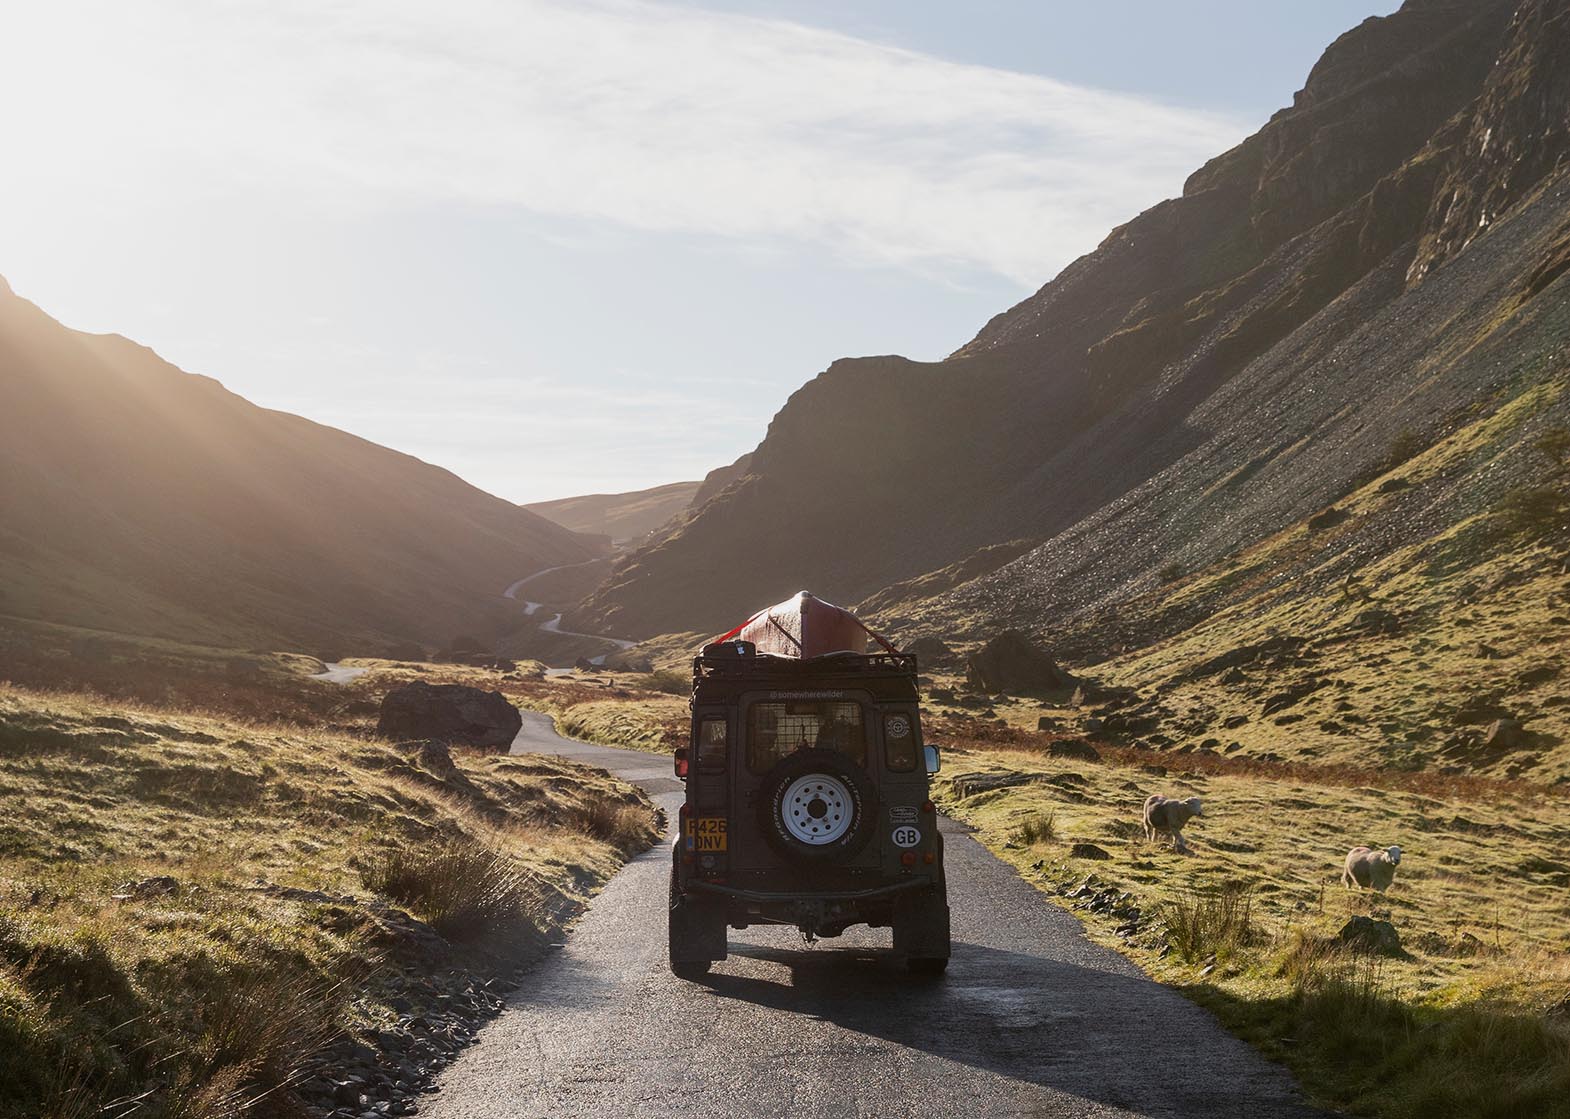 Image of a Land Rover with a canoe on the roof driving up Honister Pass whilst the sun is shining.